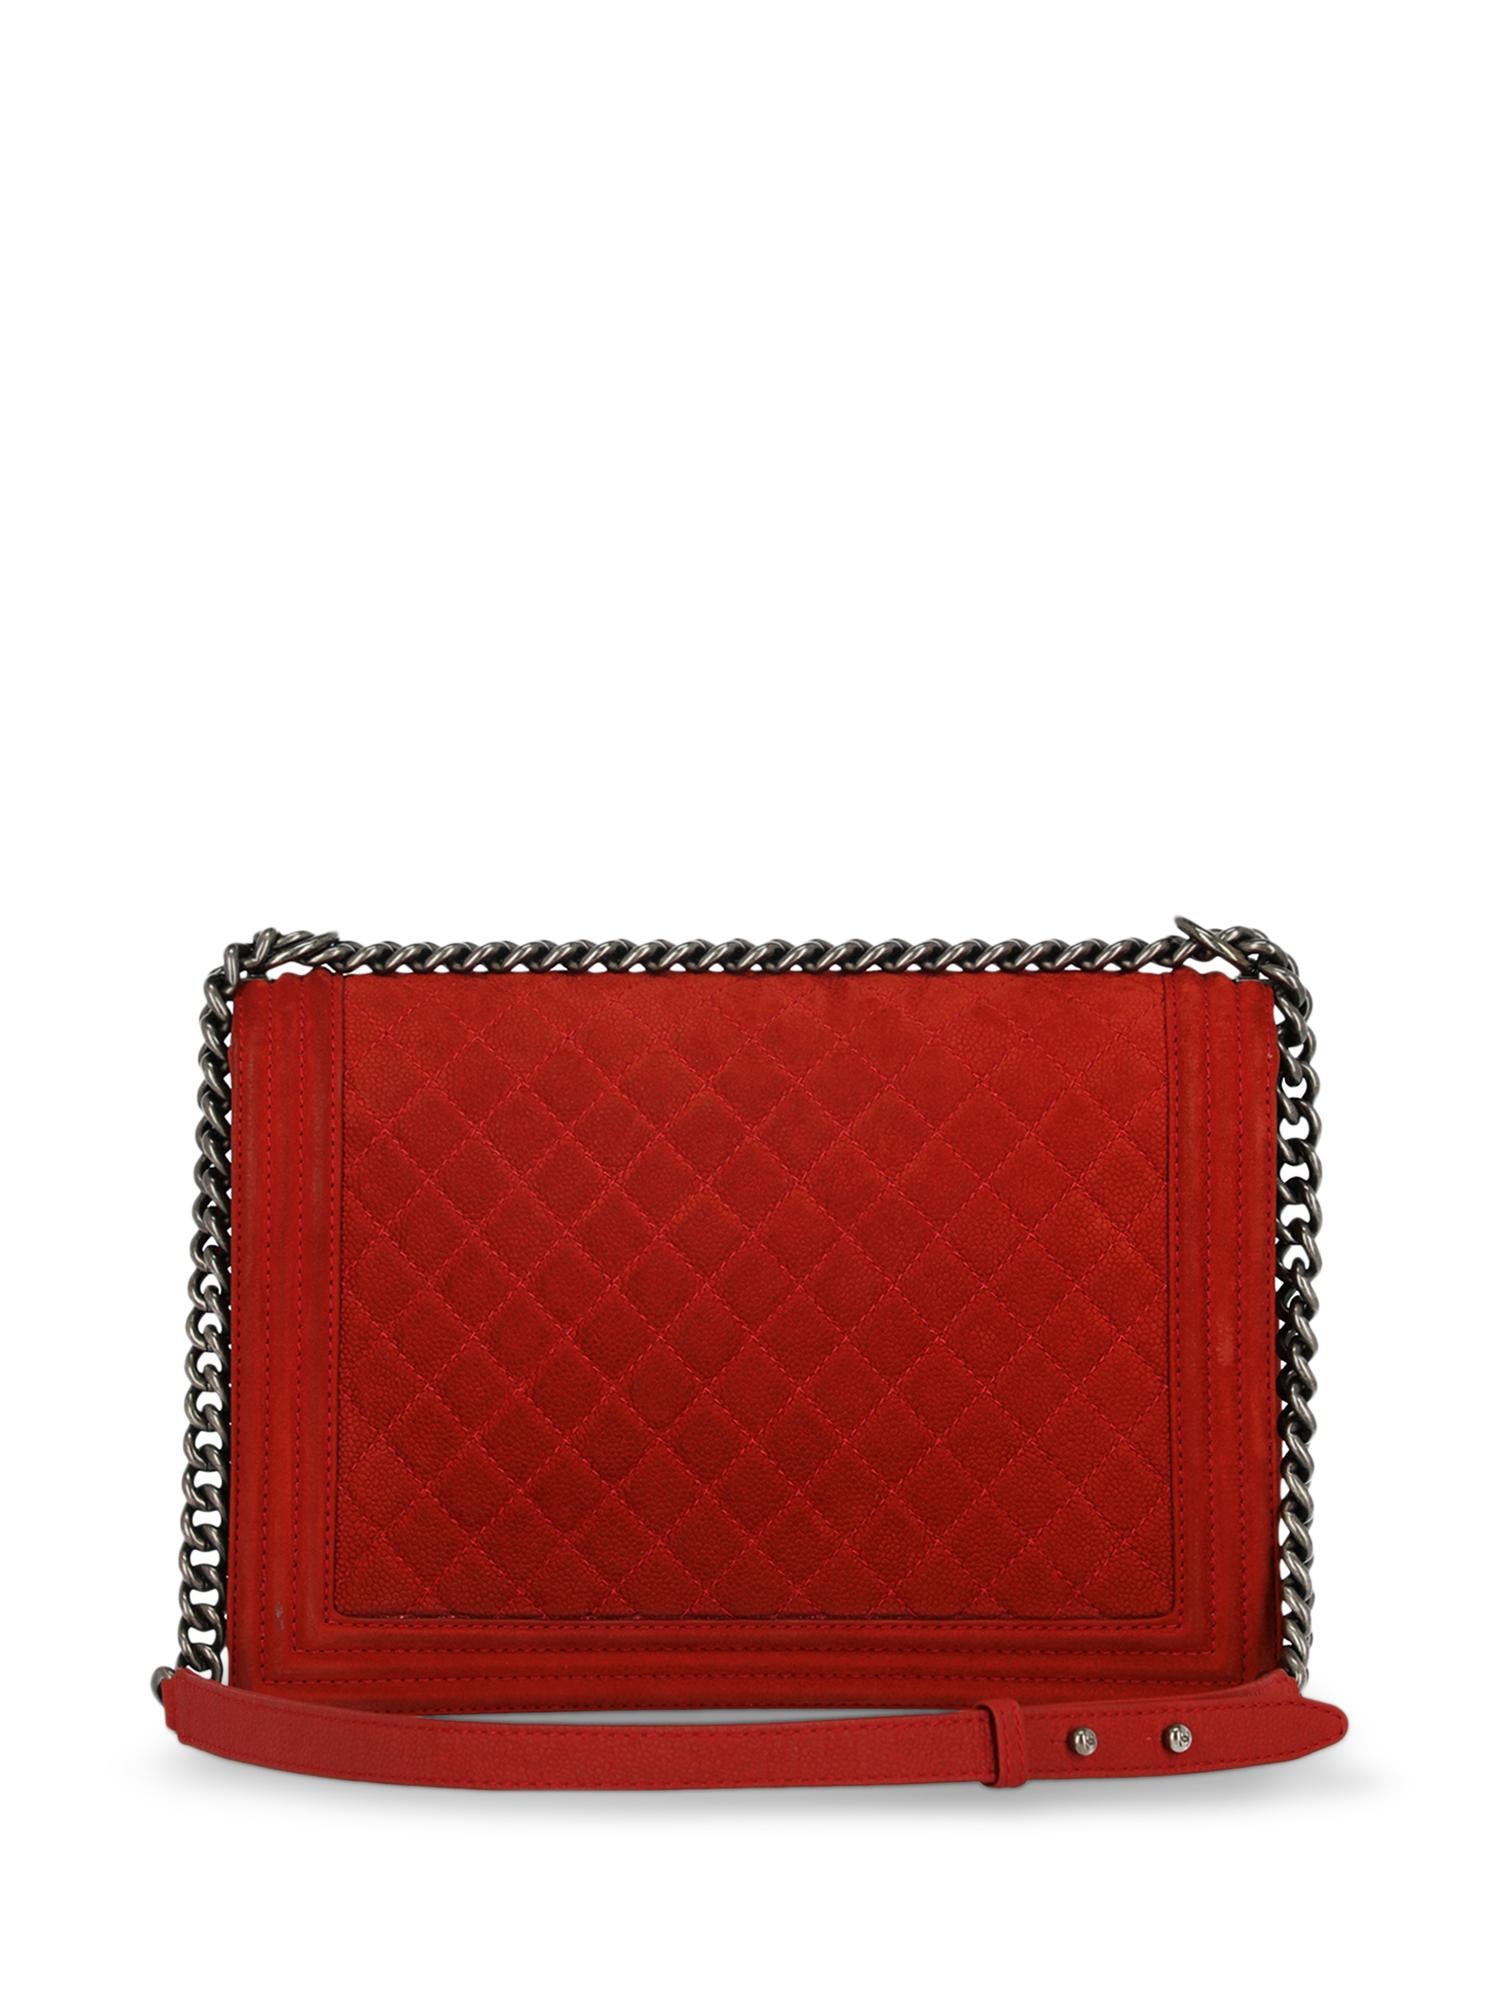 Women's Chanel Woman Boy Red  For Sale